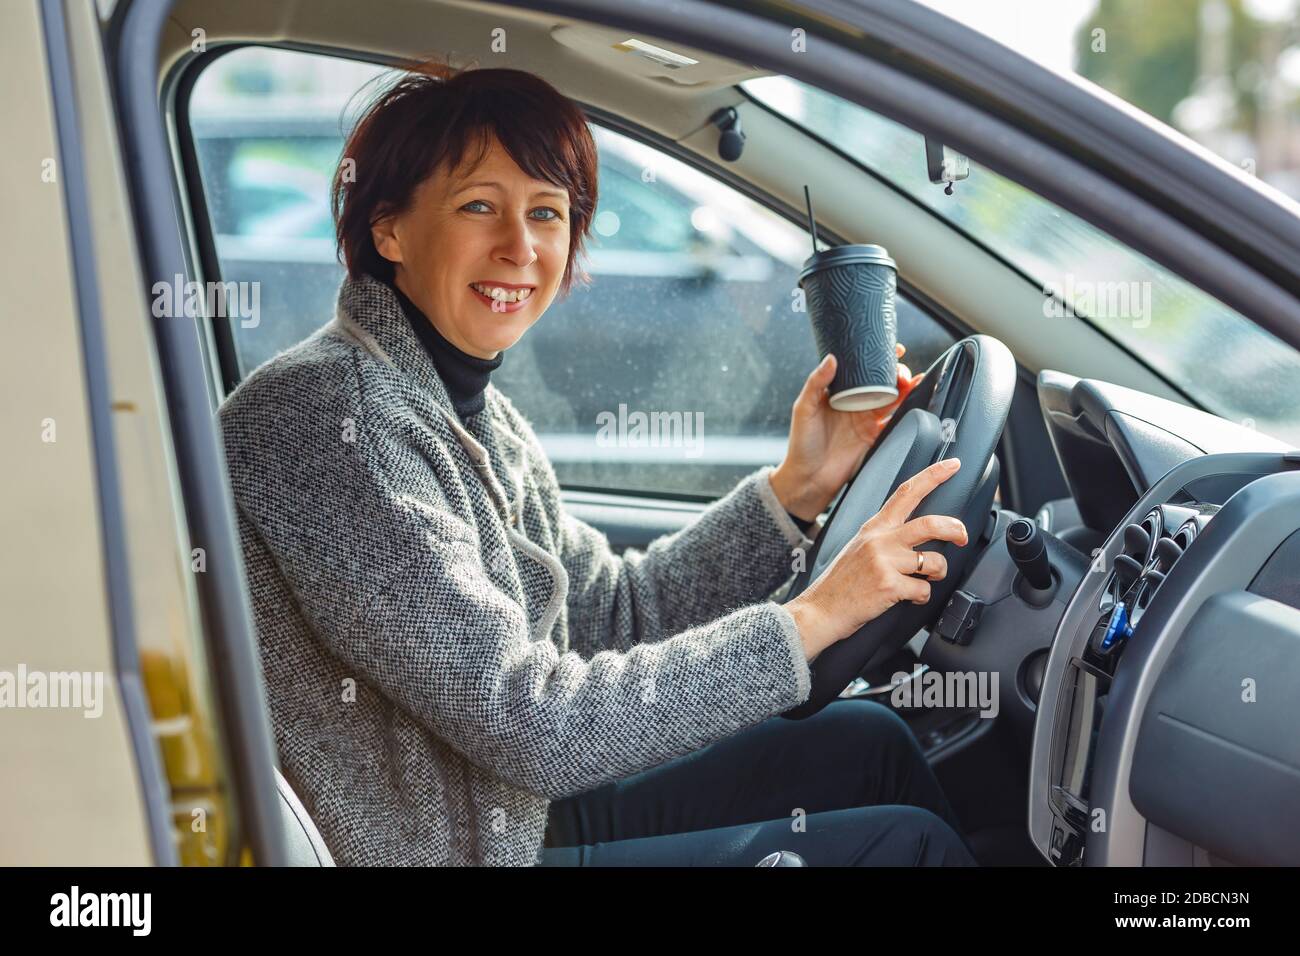 Portrait of a woman driving a car. Learning to drive Stock Photo